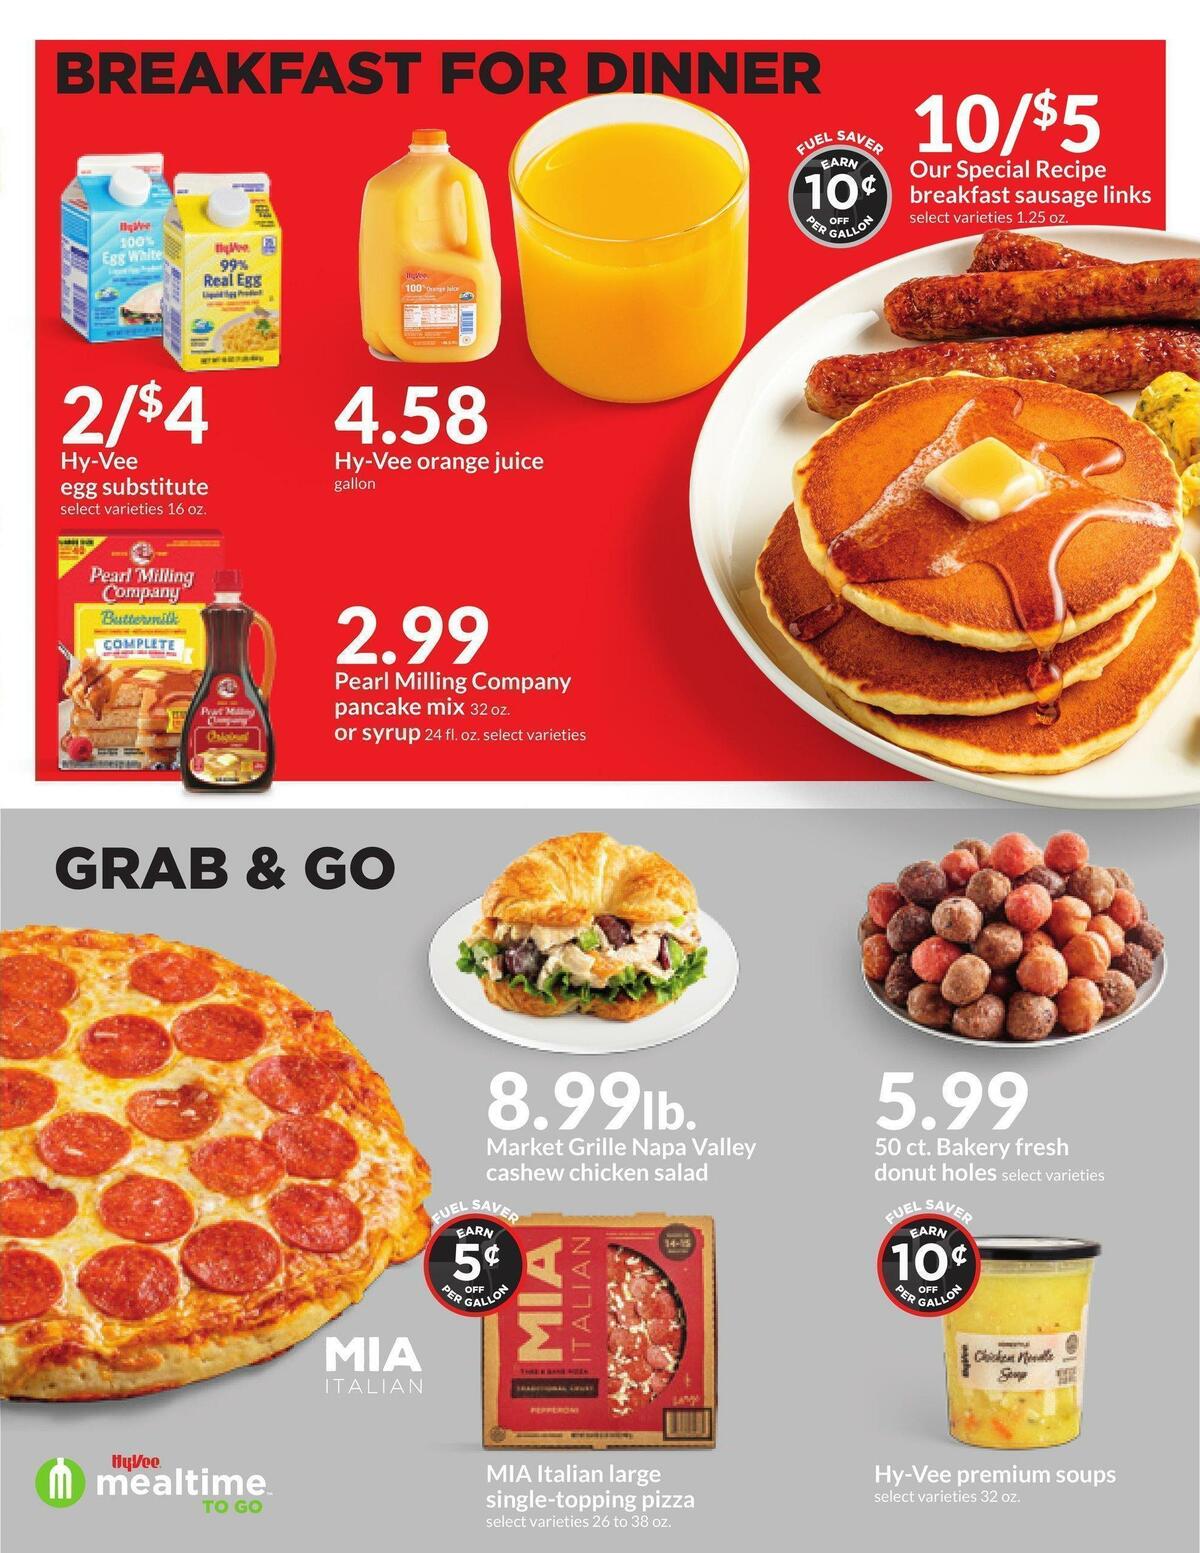 Hy-Vee Weekly Ad from January 18